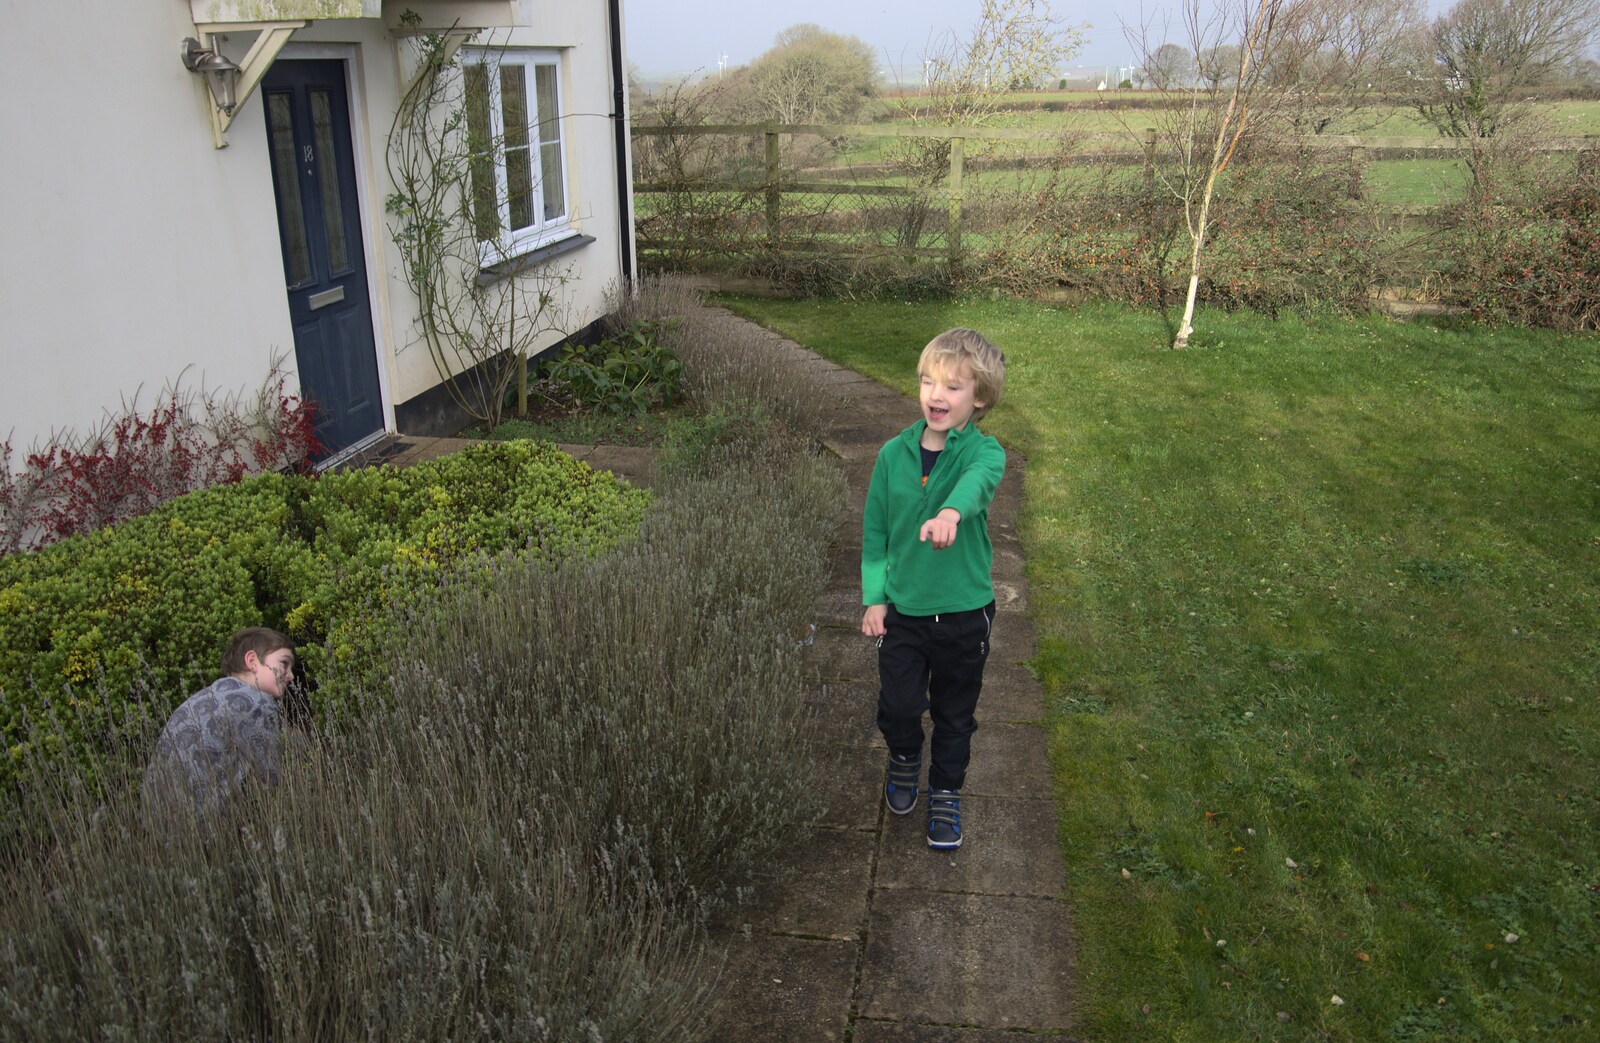 The boys hide-and-seek in the flower beds from An End-of-Year Trip to Spreyton, Devon - 29th December 2017